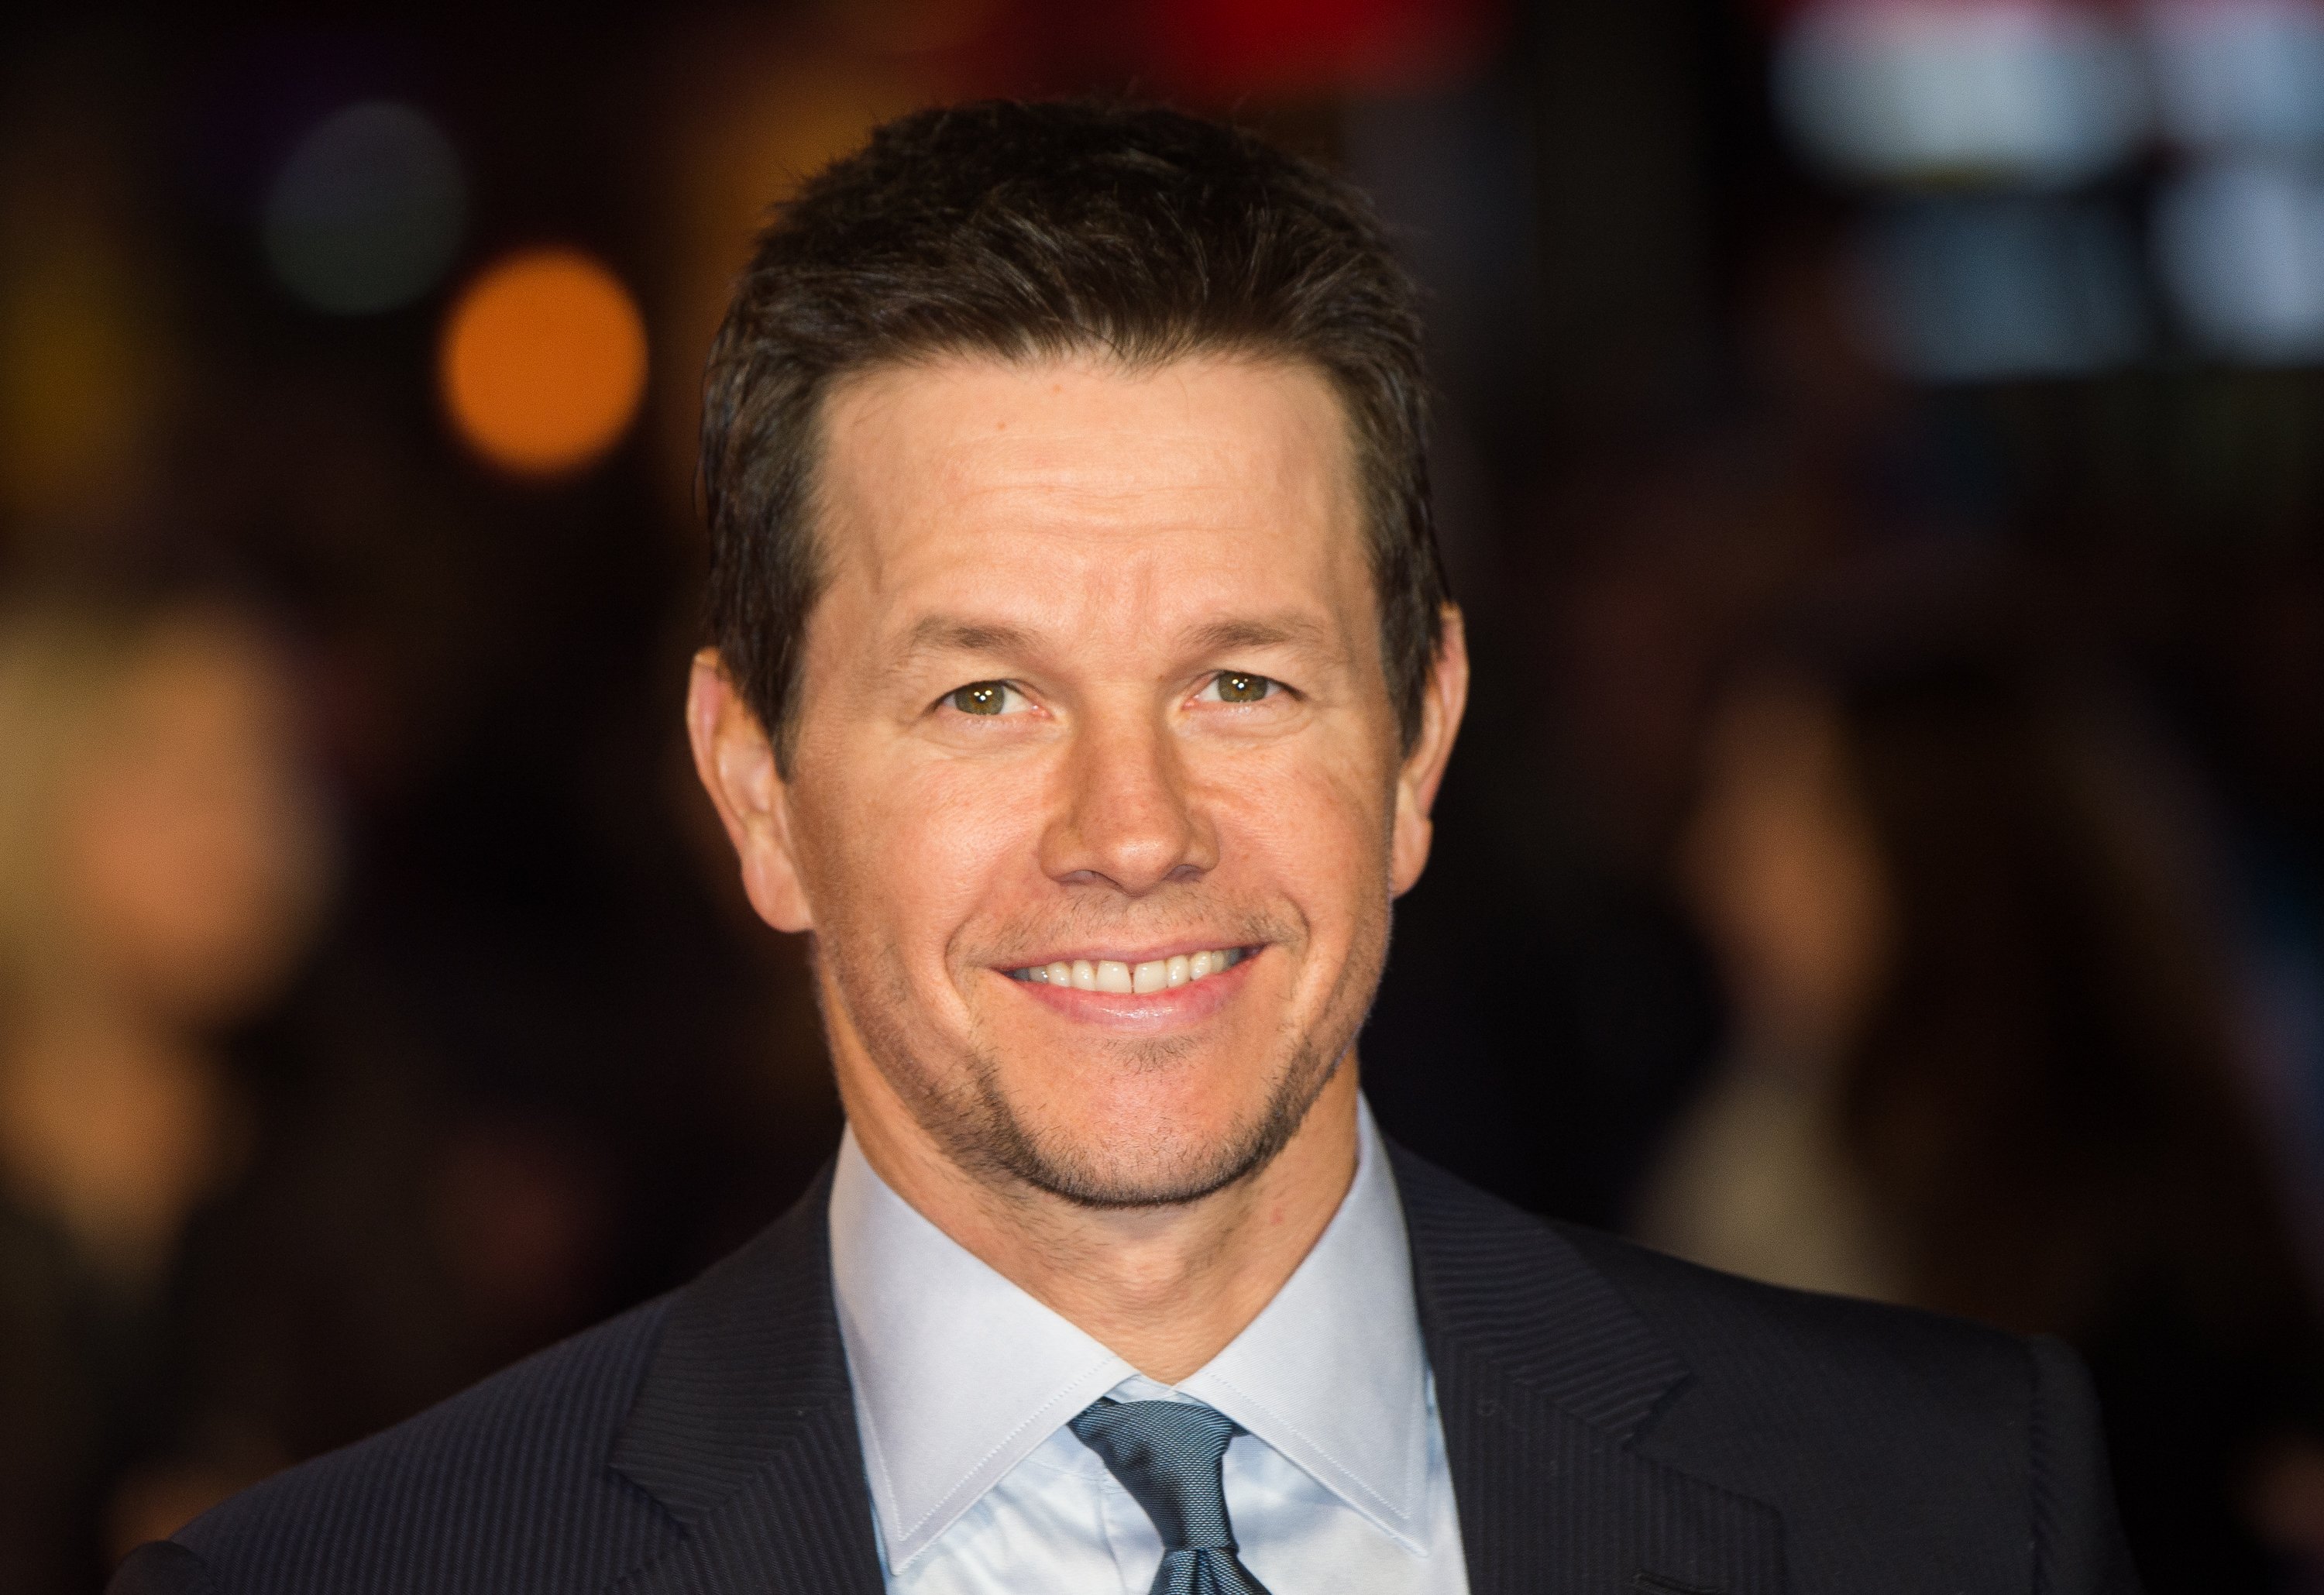 Mark Wahlberg pictured at the UK Film Premiere of "Daddy's Home" at Vue West End, 2015, London, England. | Photo: Getty Images